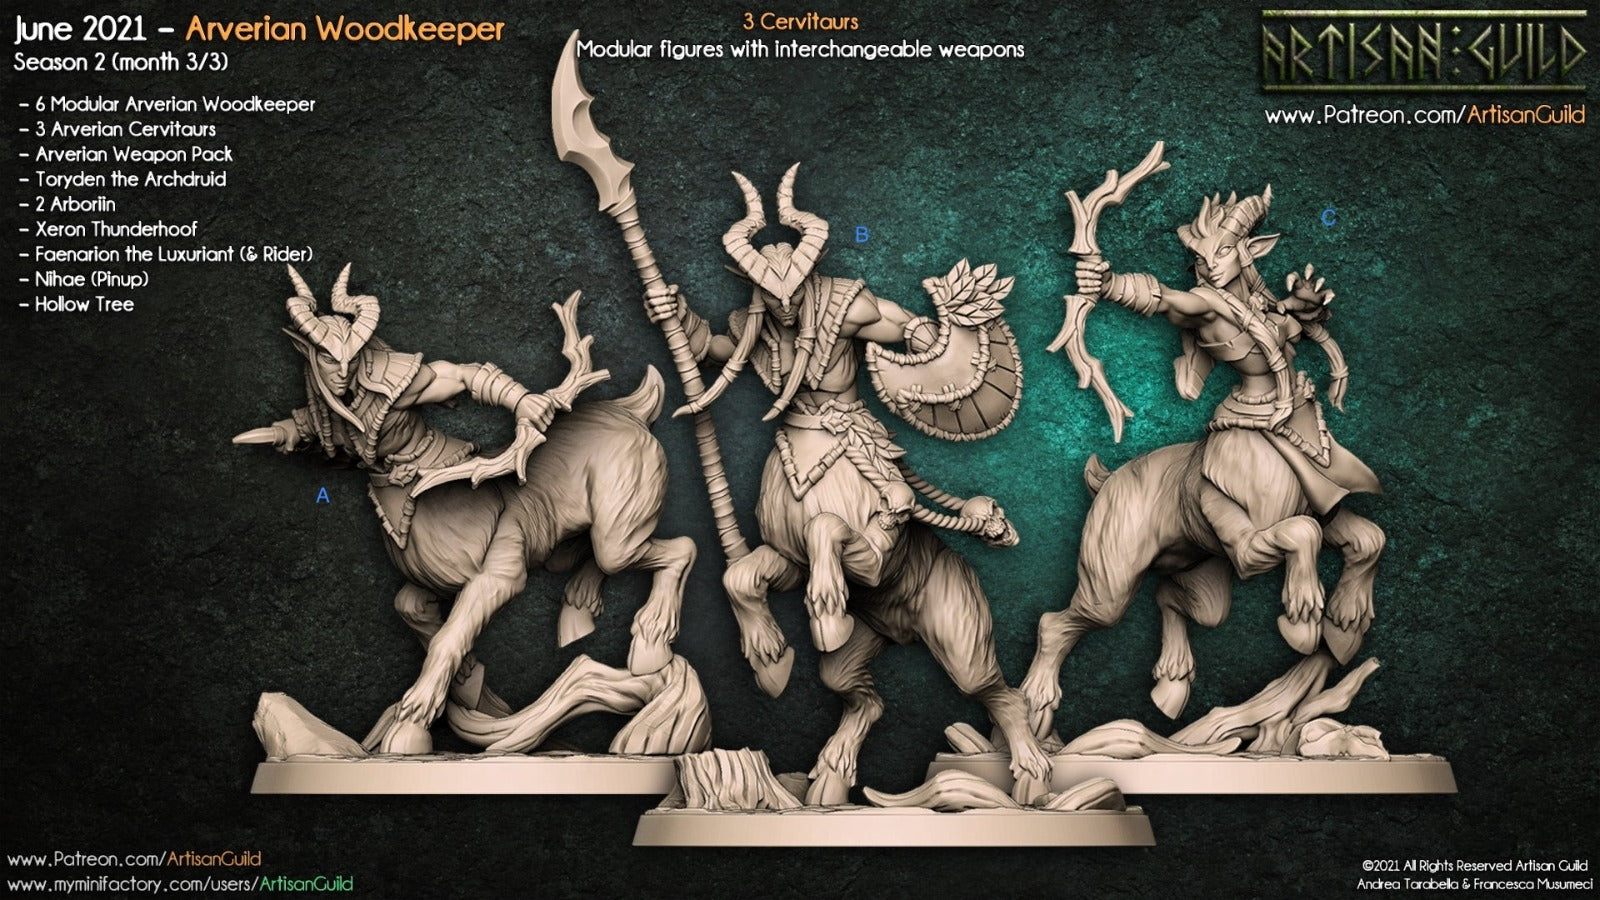 Centaur faun forest creature archer spear and shield  unpainted resin unpainted resin 3D Printed Miniature